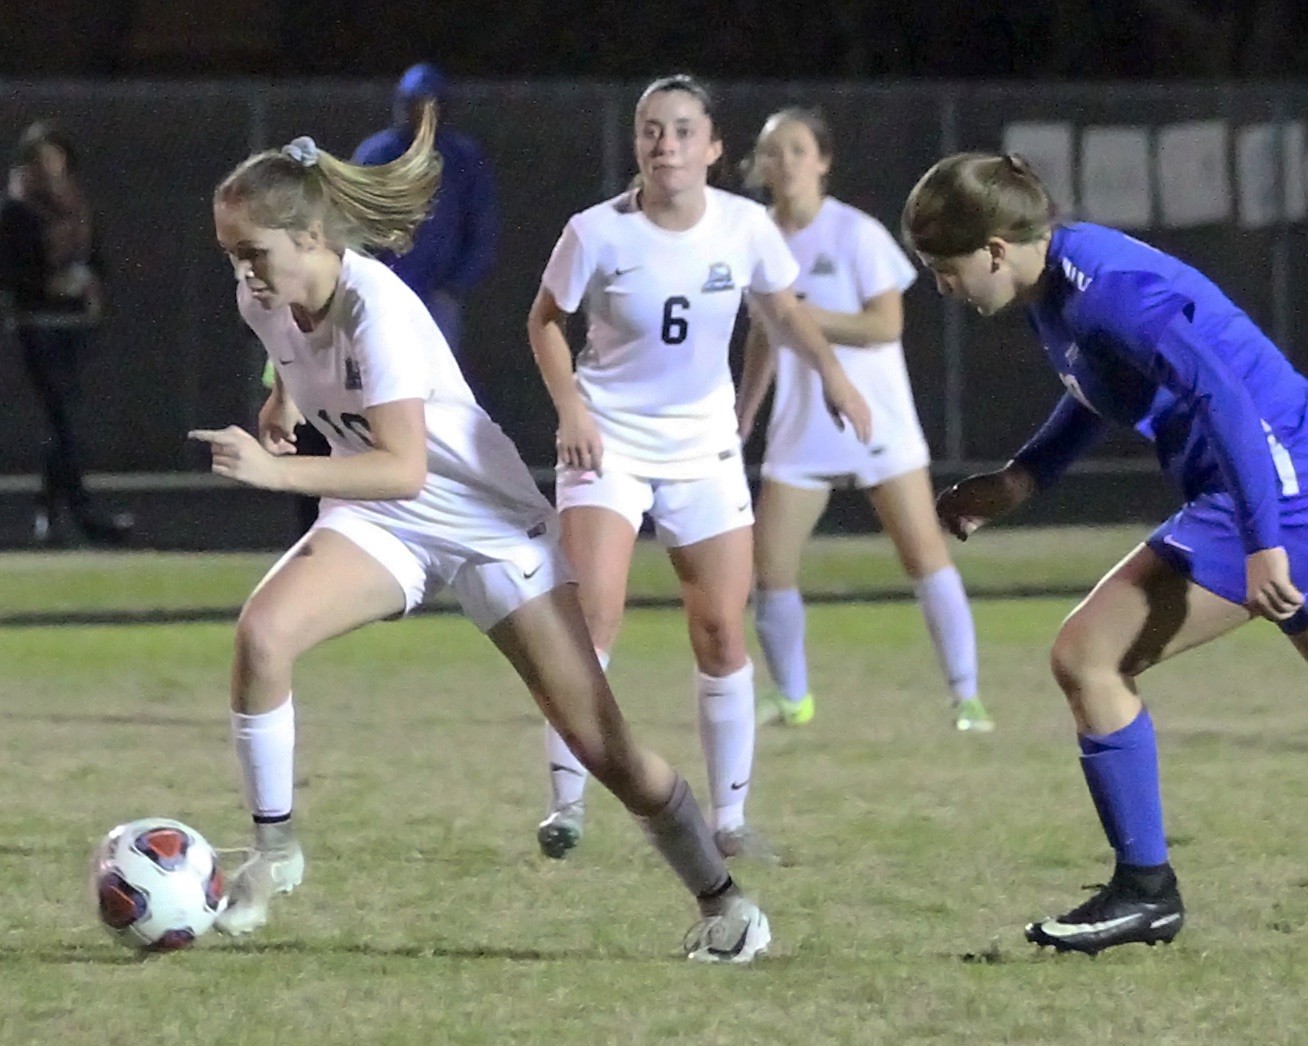 The Sharks’ Kai Hayes races past the Pedro defender as Molly Miller looks on.